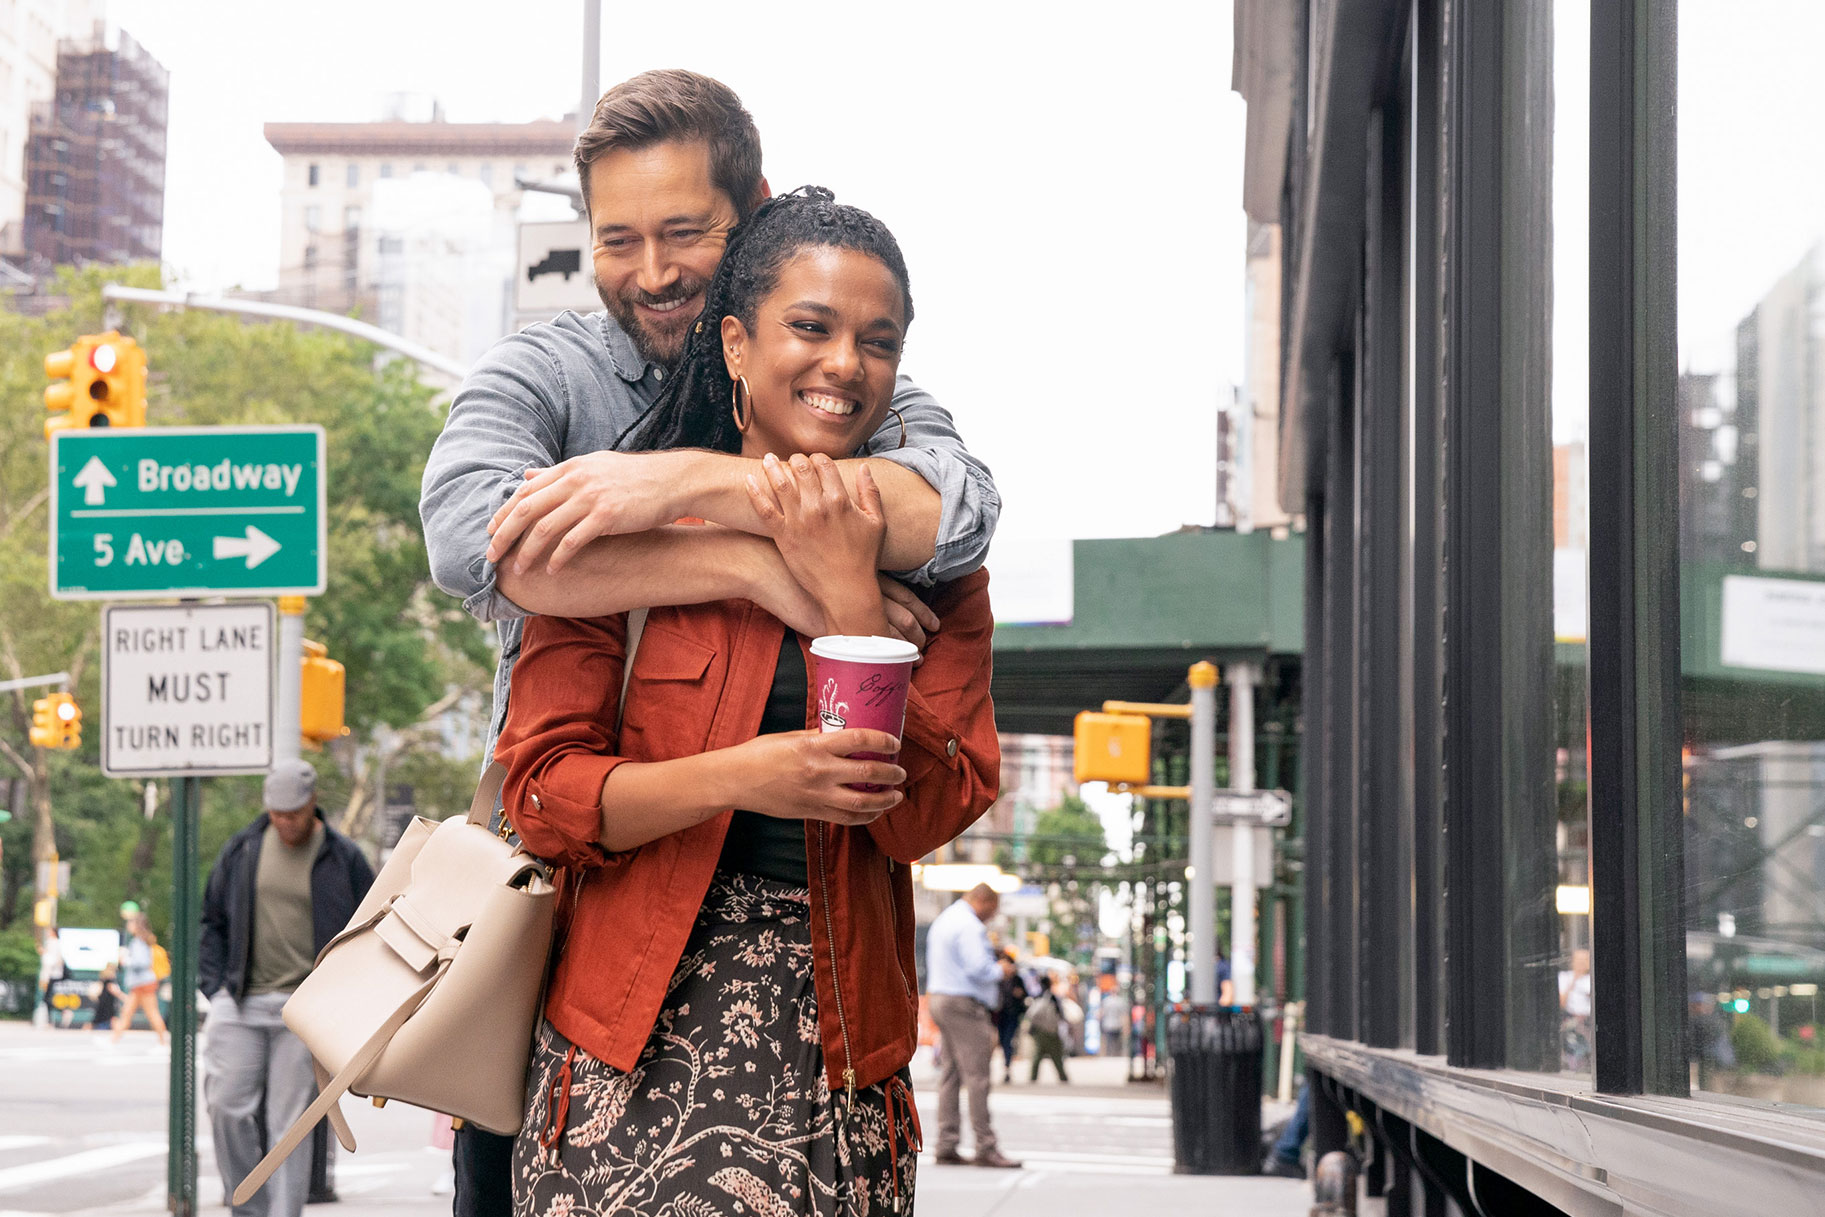 Ryan Eggold and Freema Agyeman together in New Amsterdam